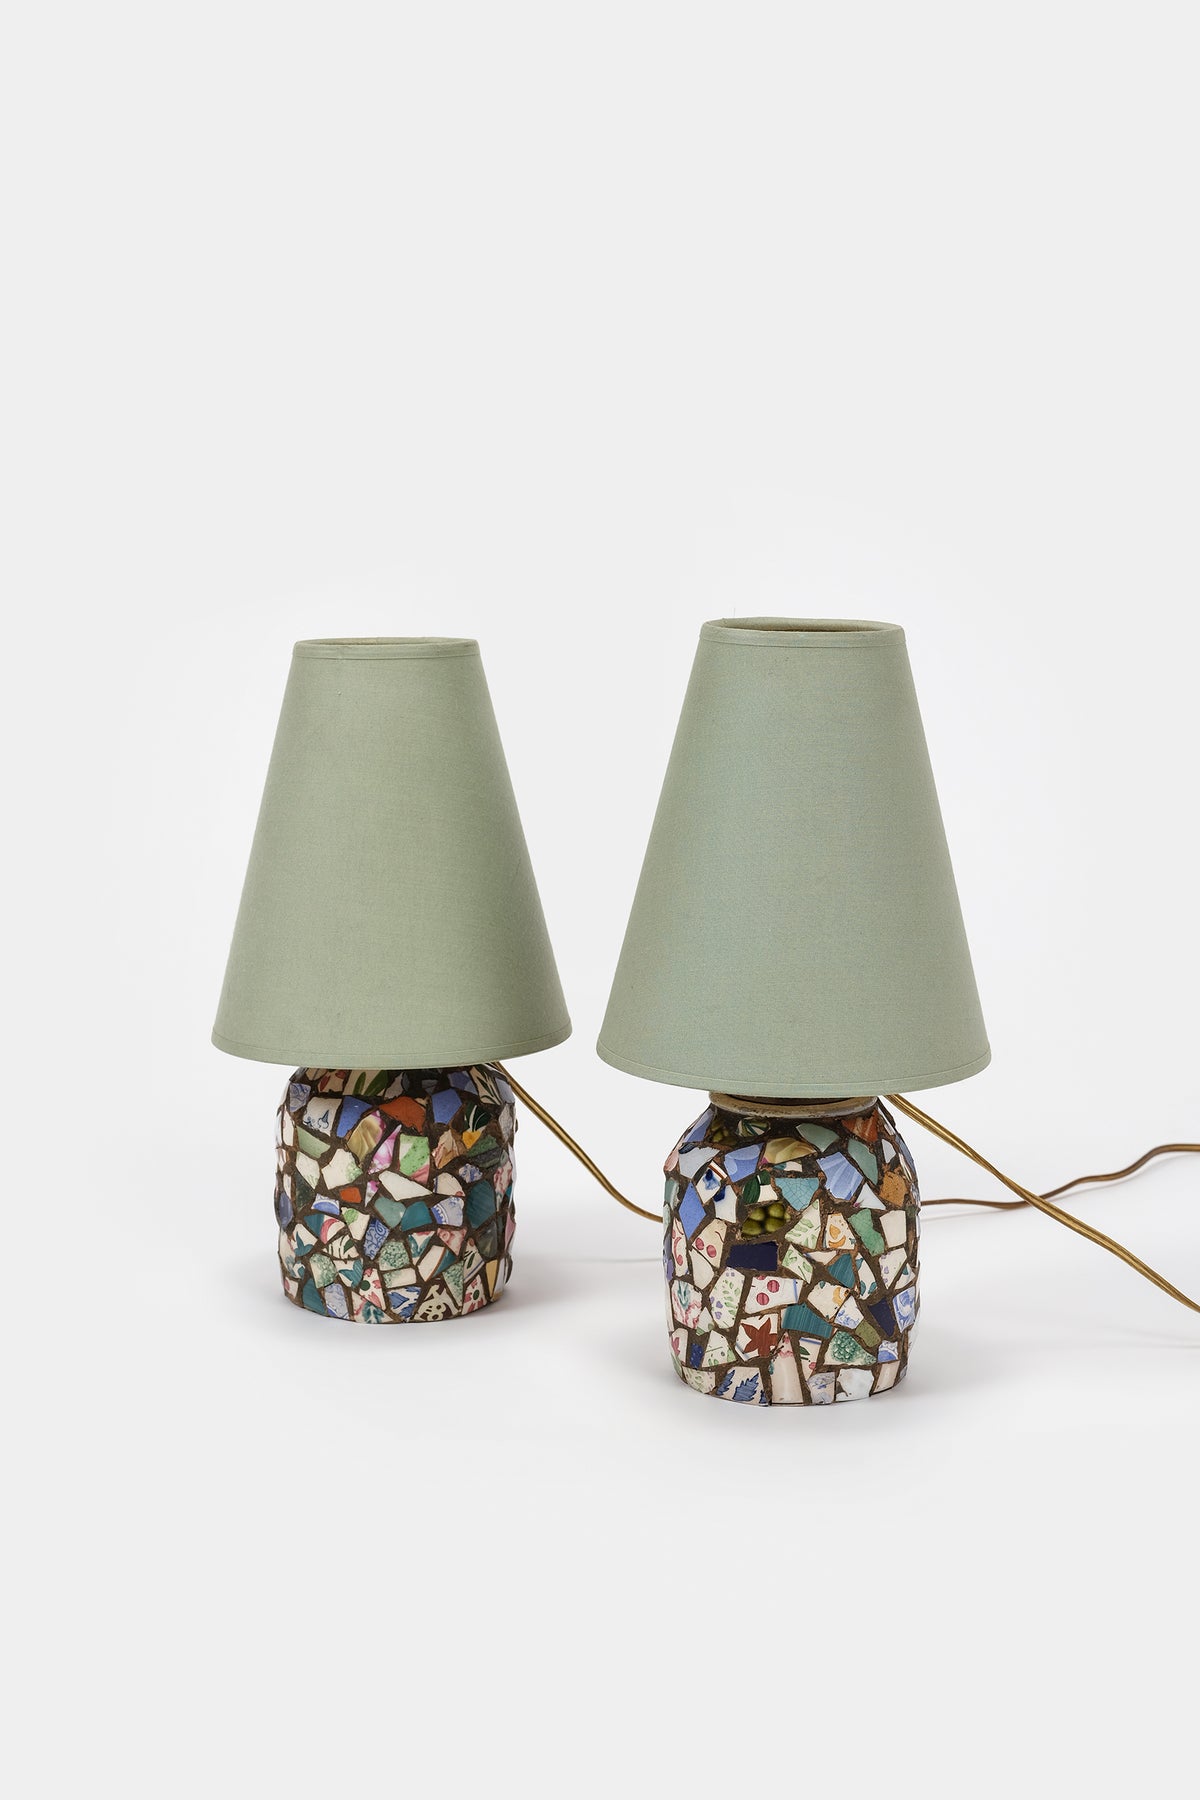 Pair of Lamps with Mosaic, France, 50s